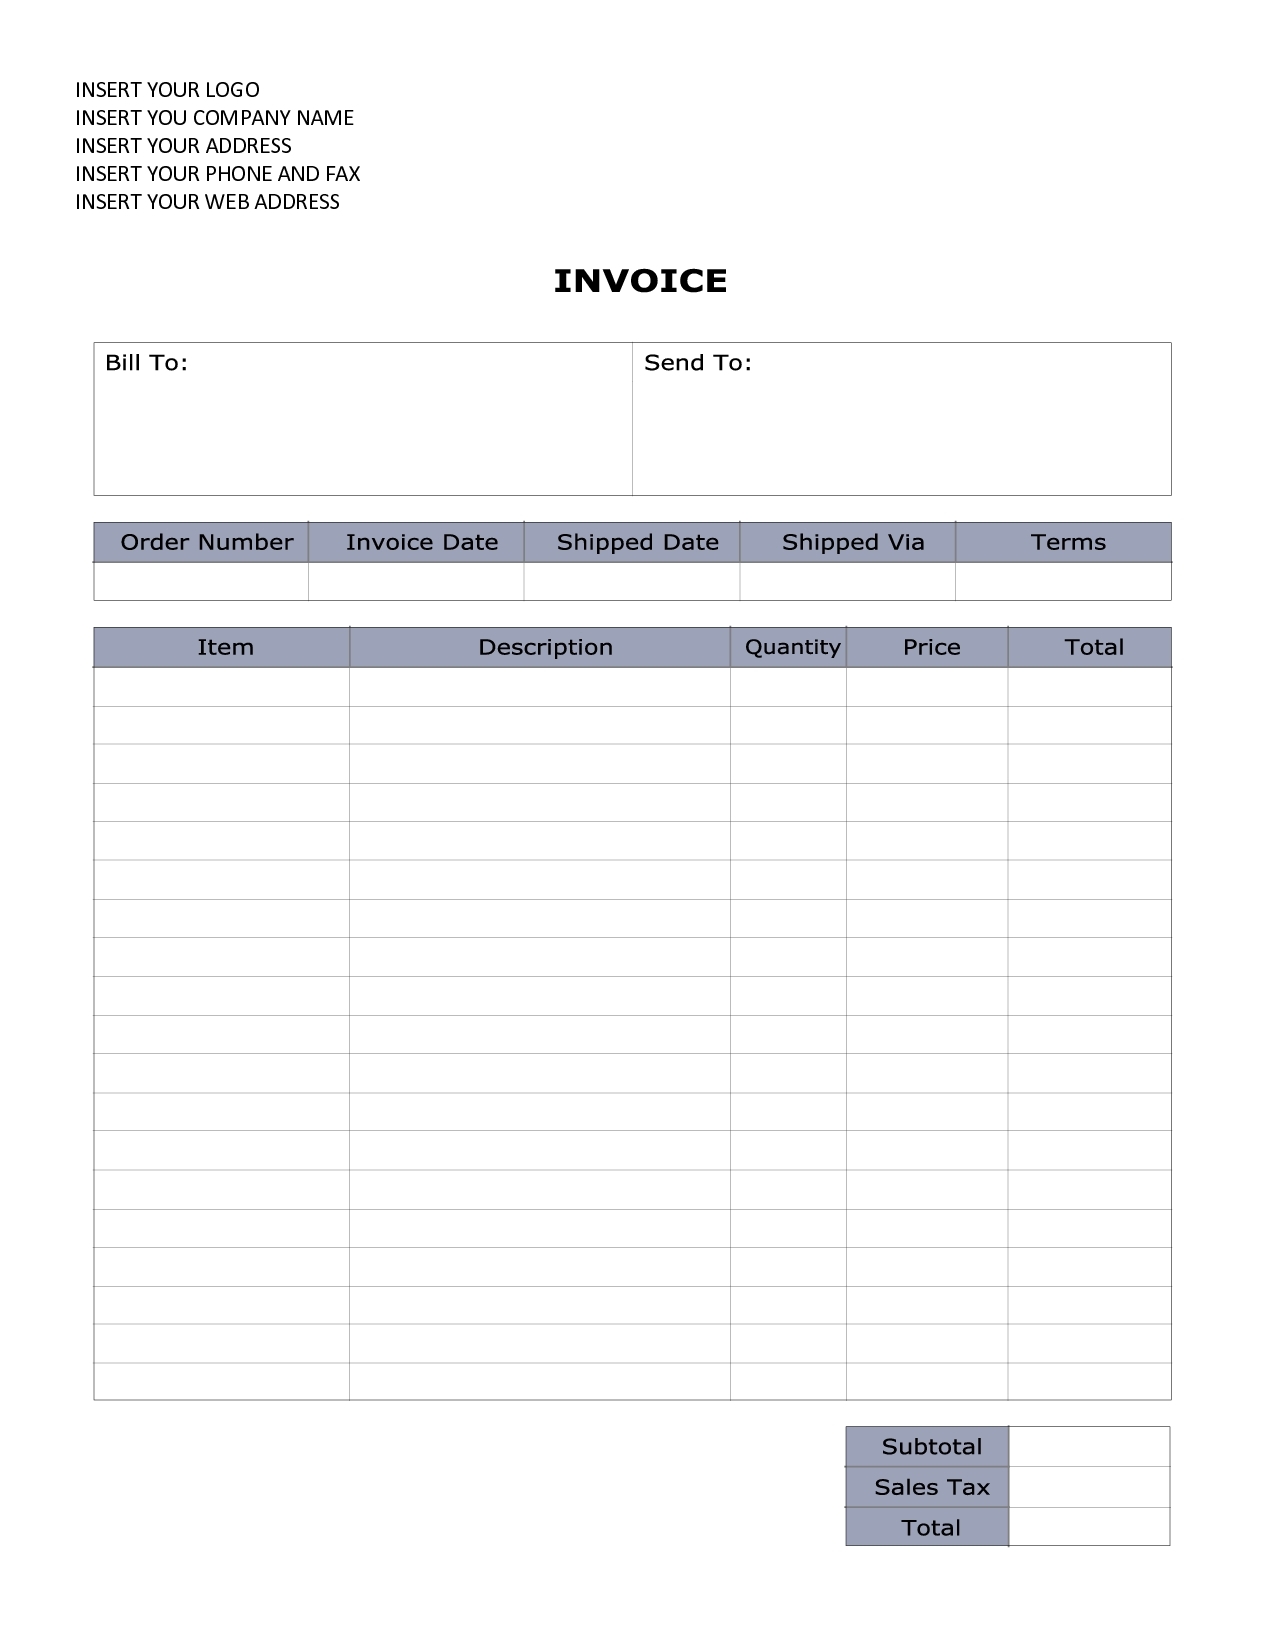 sample invoice in word invoice template word invoice template free 2016 1275 X 1650